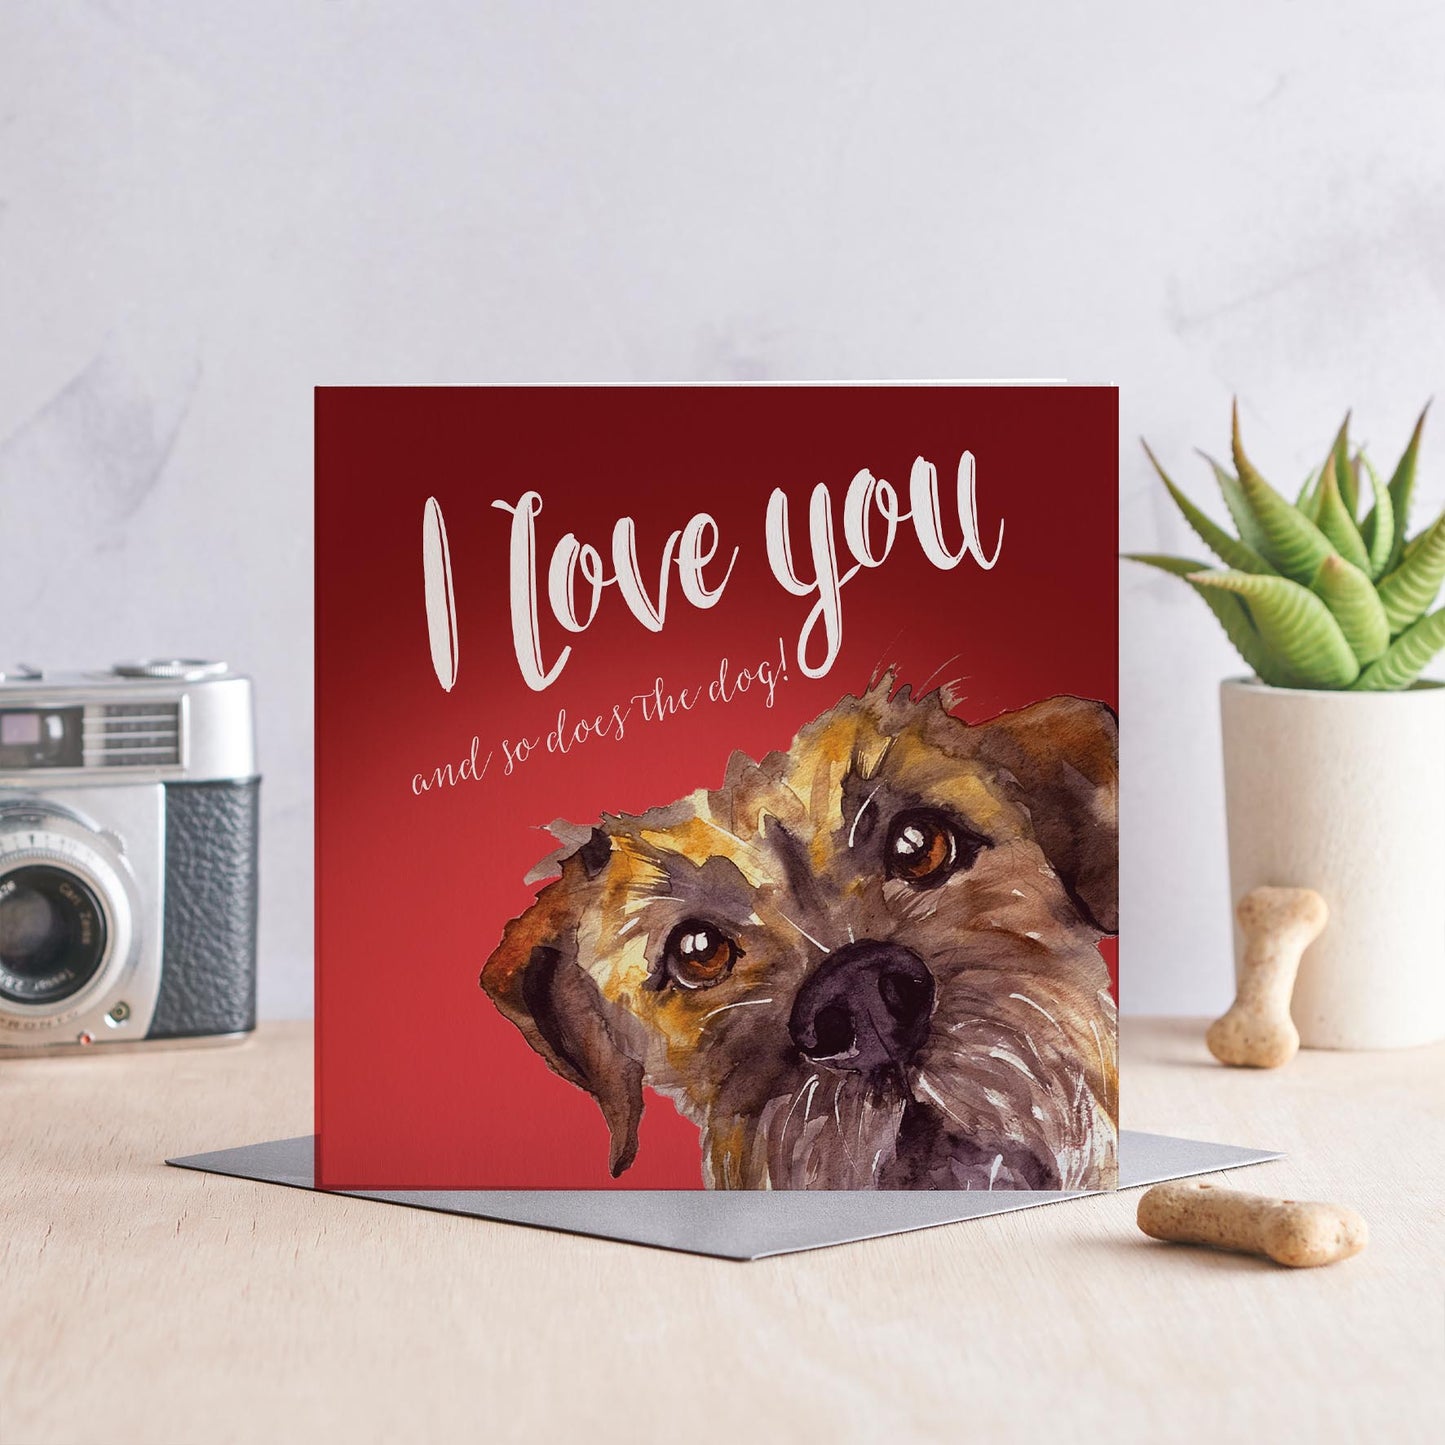 I love you and so does the dog - Border Terrier